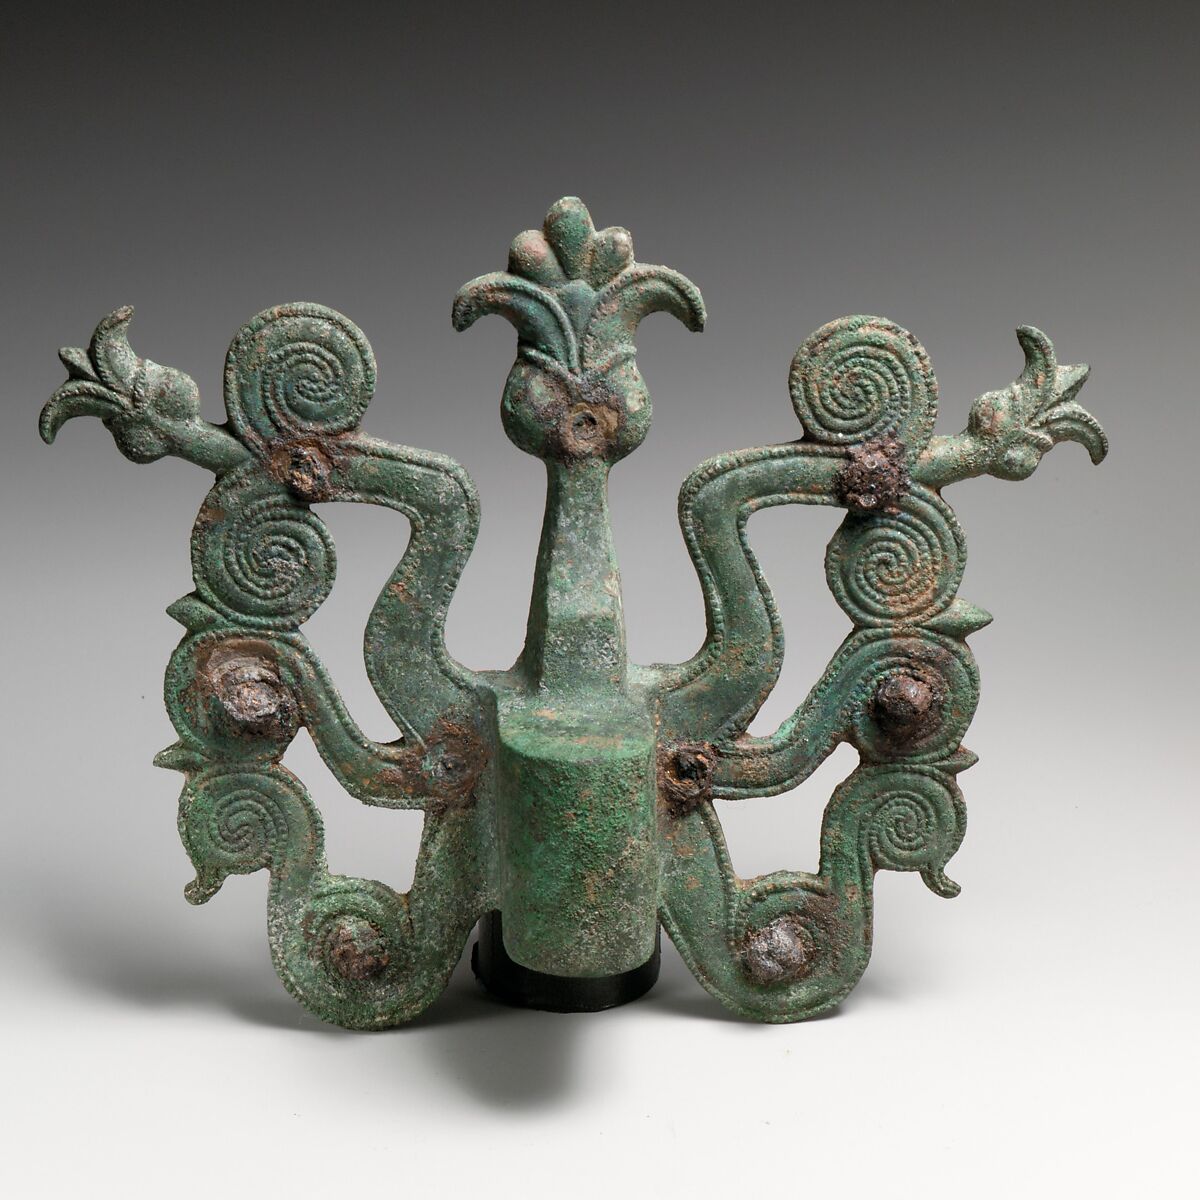 Fragments of a cart or chariot, sockets, Bronze, Iron, Etruscan 